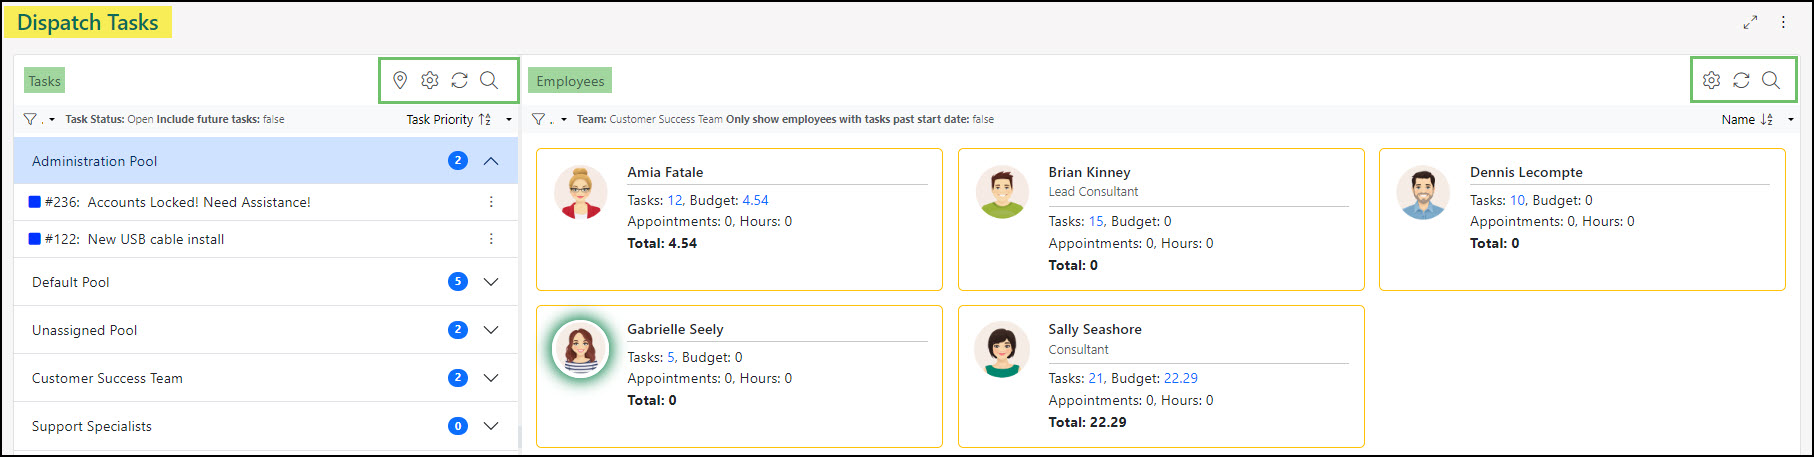 Dispatch Tasks page showing Task List pane and Employee List pane